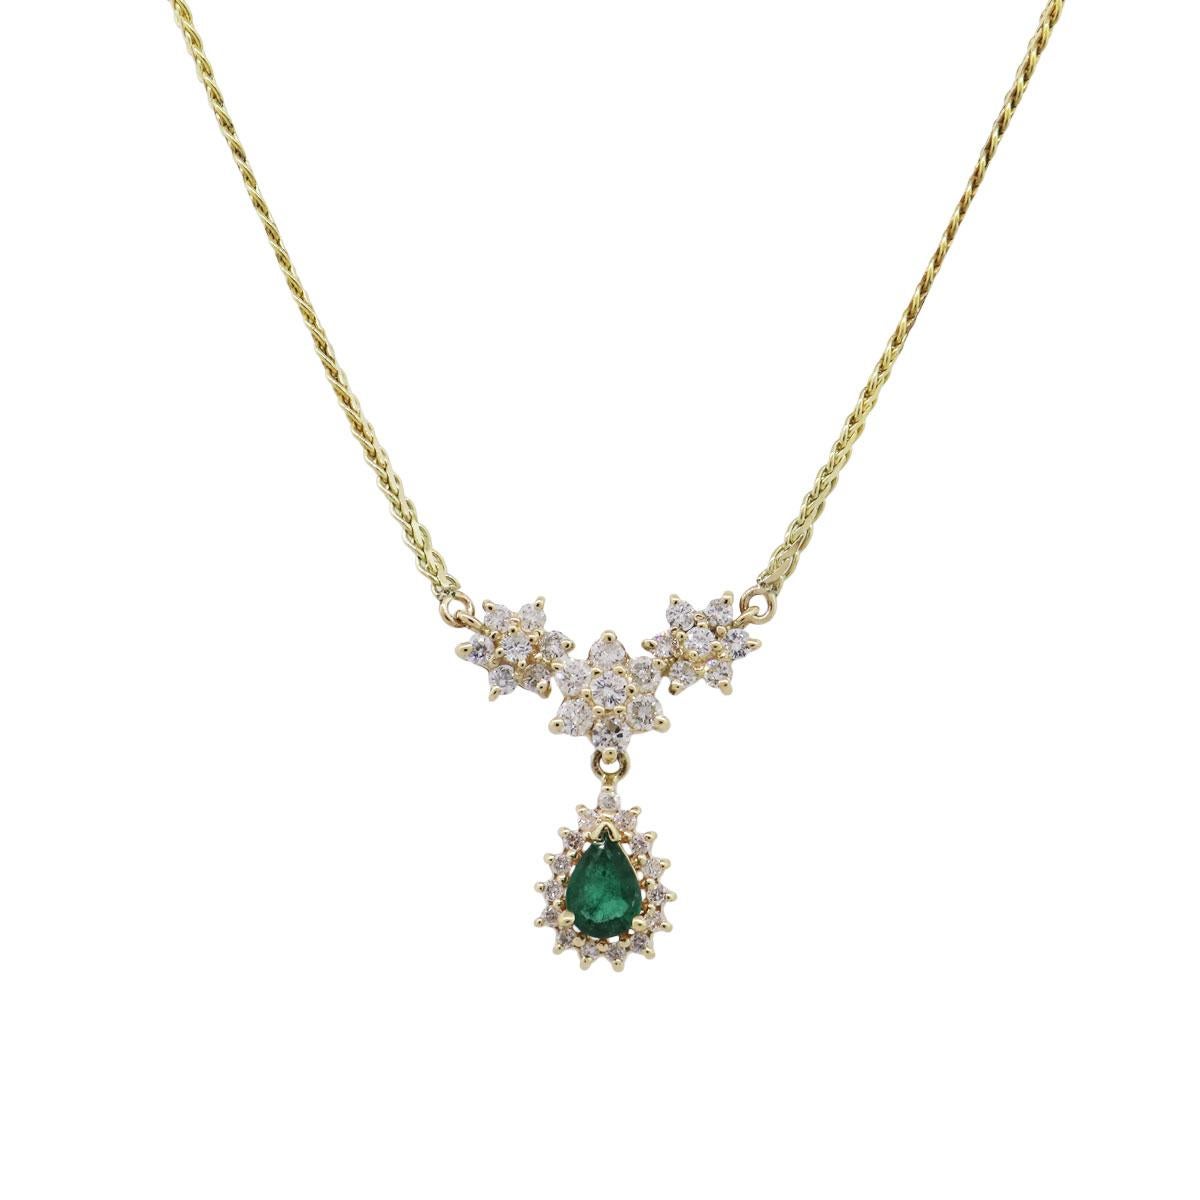 Material: 14k yellow gold
Diamond Details: Approximately 0.65ctw of round brilliant diamonds. Diamonds are G/H in color and VS in clarity
Gemstone Details: Pear shape emerald measuring approximately 7mm x 4.93mm
Necklace Measurements: Necklace is